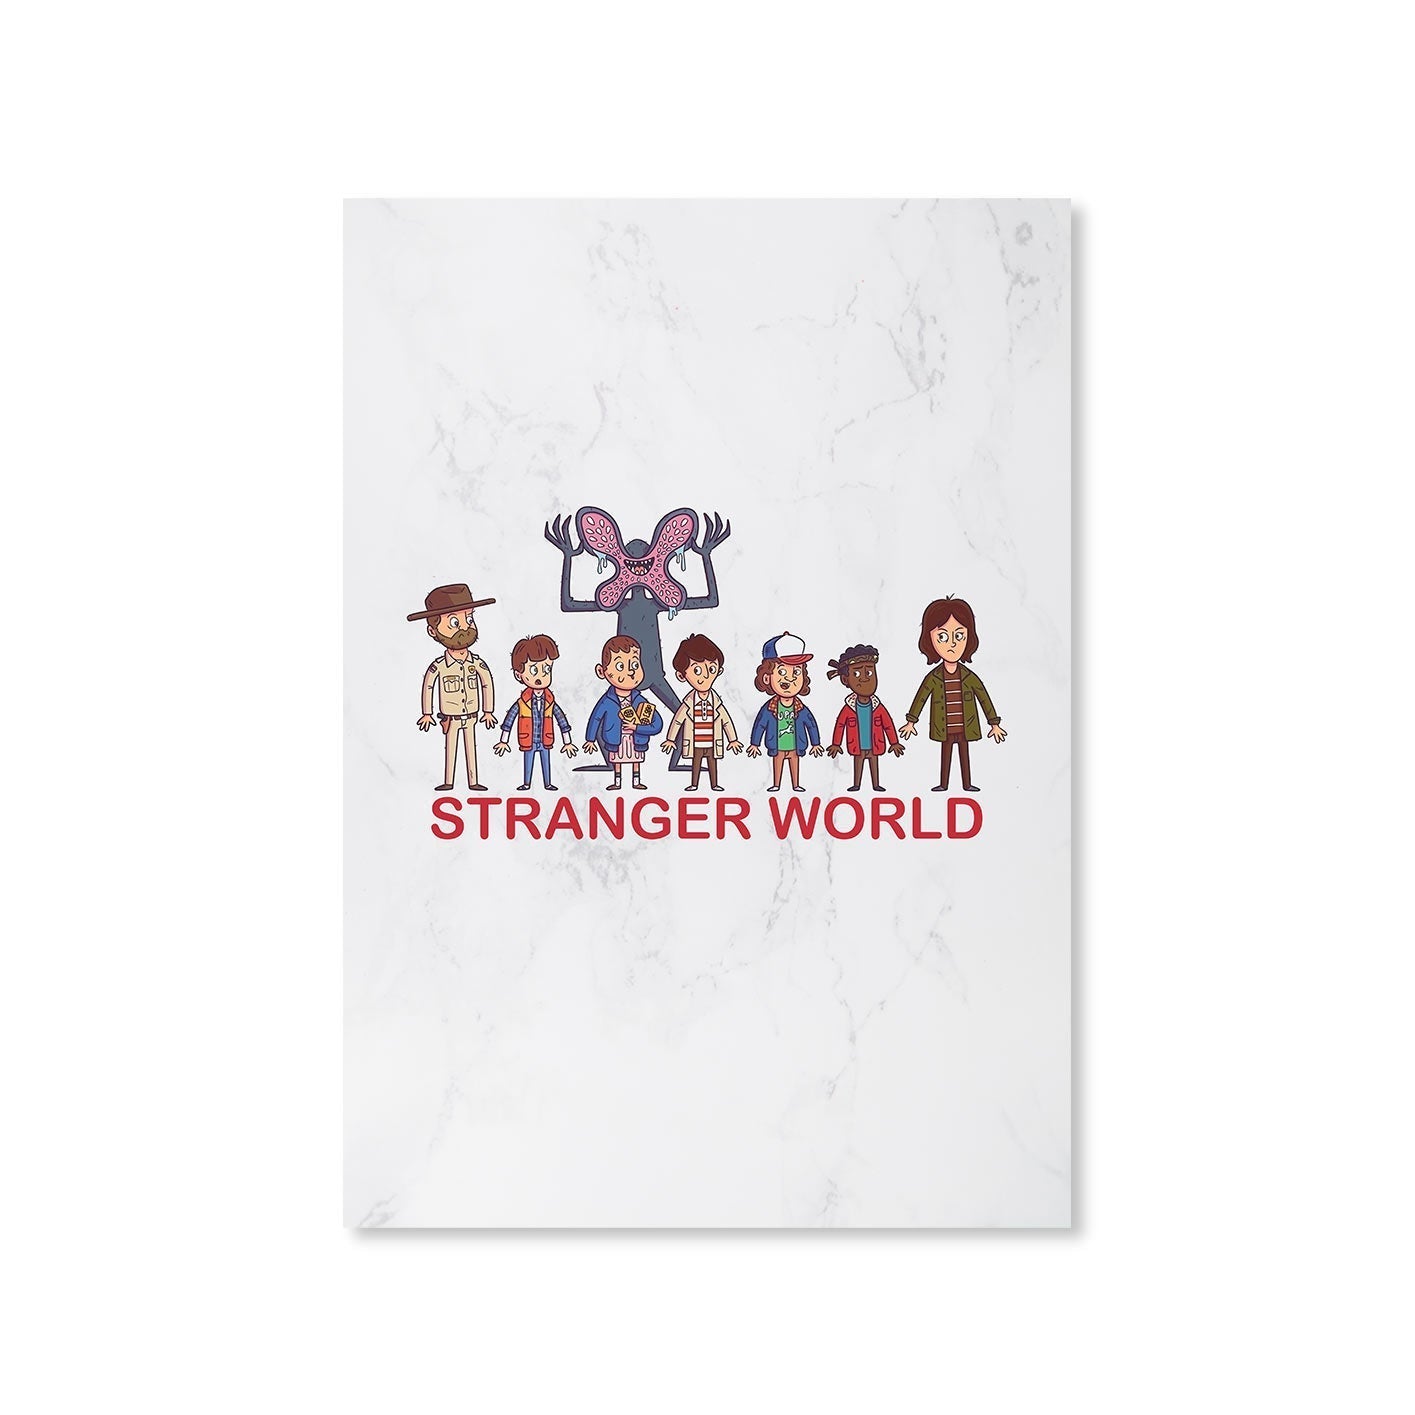 stranger things stranger world poster wall art buy online united states of america usa the banyan tee tbt a4 stranger things eleven demogorgon shadow monster dustin quote vector art clothing accessories merchandise